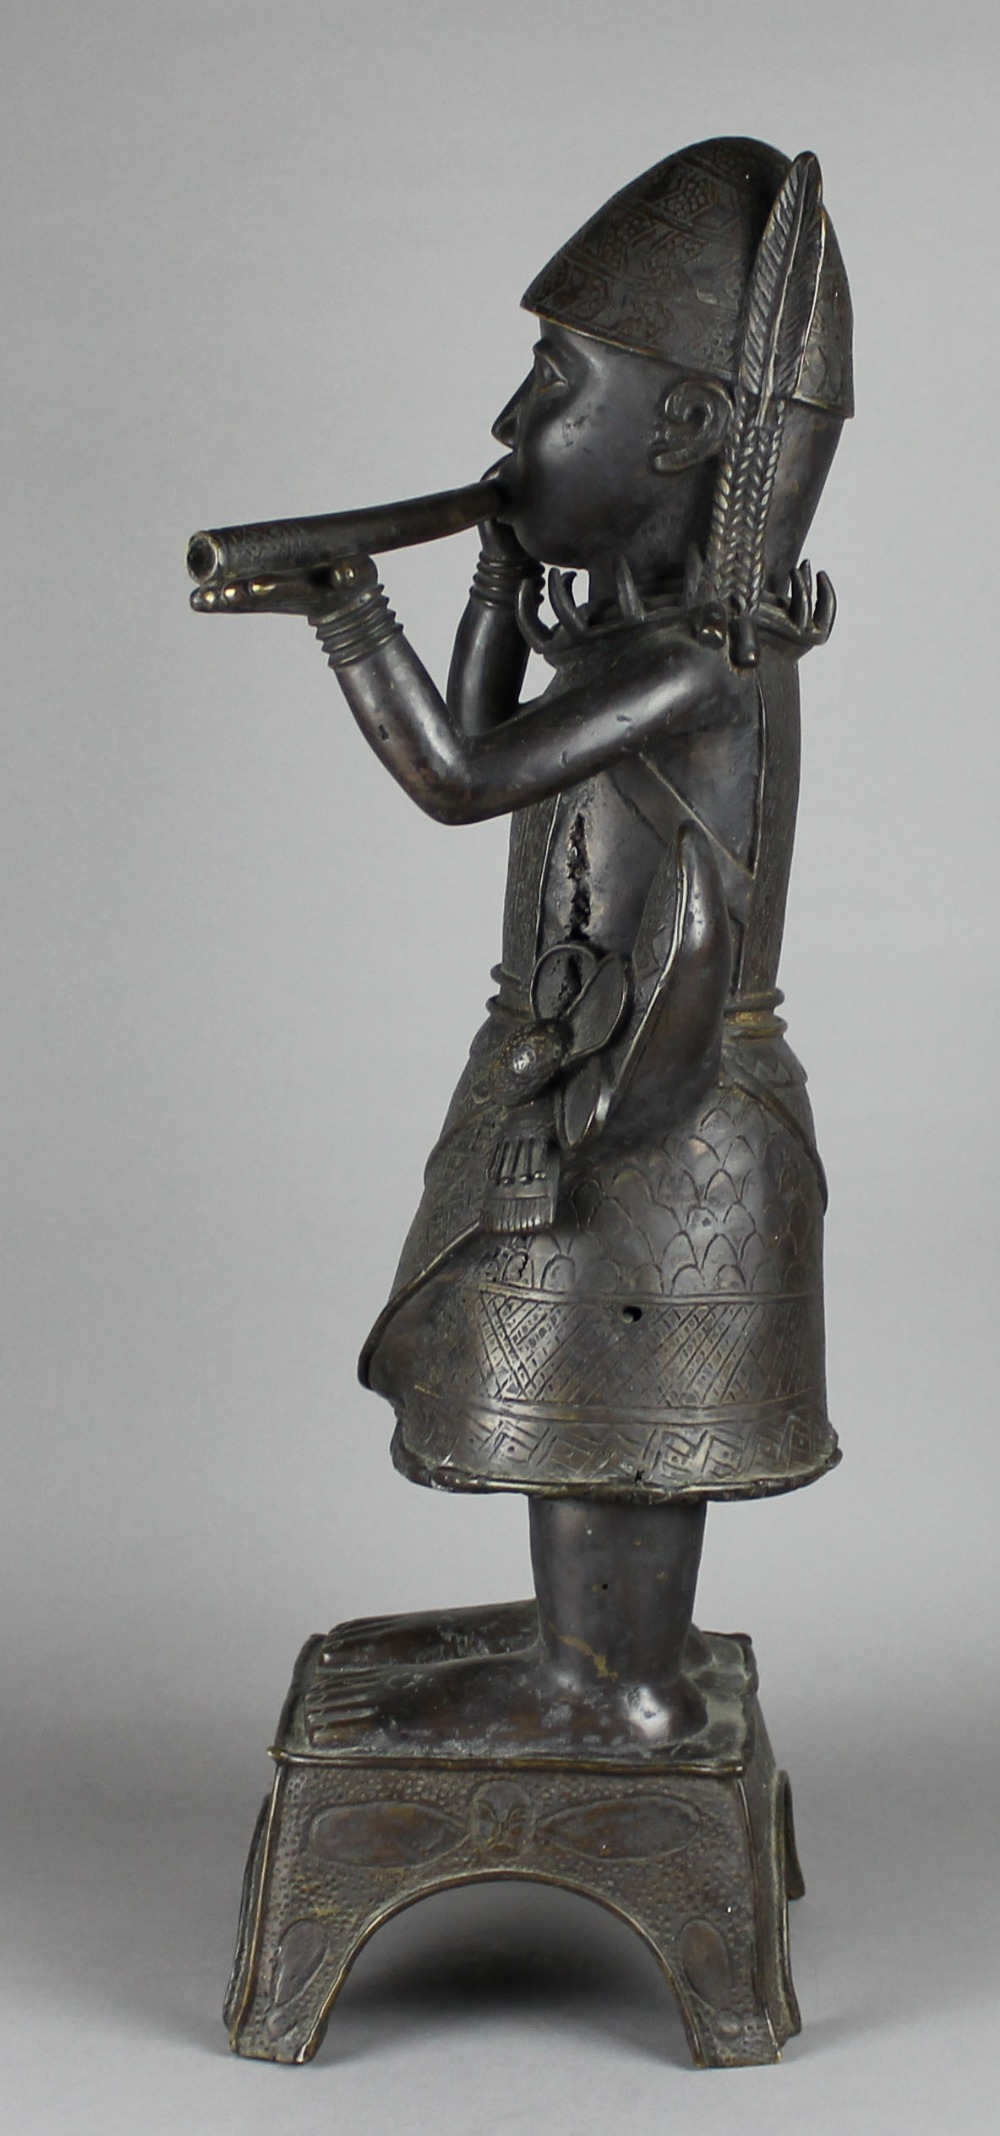 AN 18TH/19TH CENTURY BENIN DARK PATINATED BRONZE FIGURE OF A HORN-BLOWER, probably an altar - Image 7 of 12